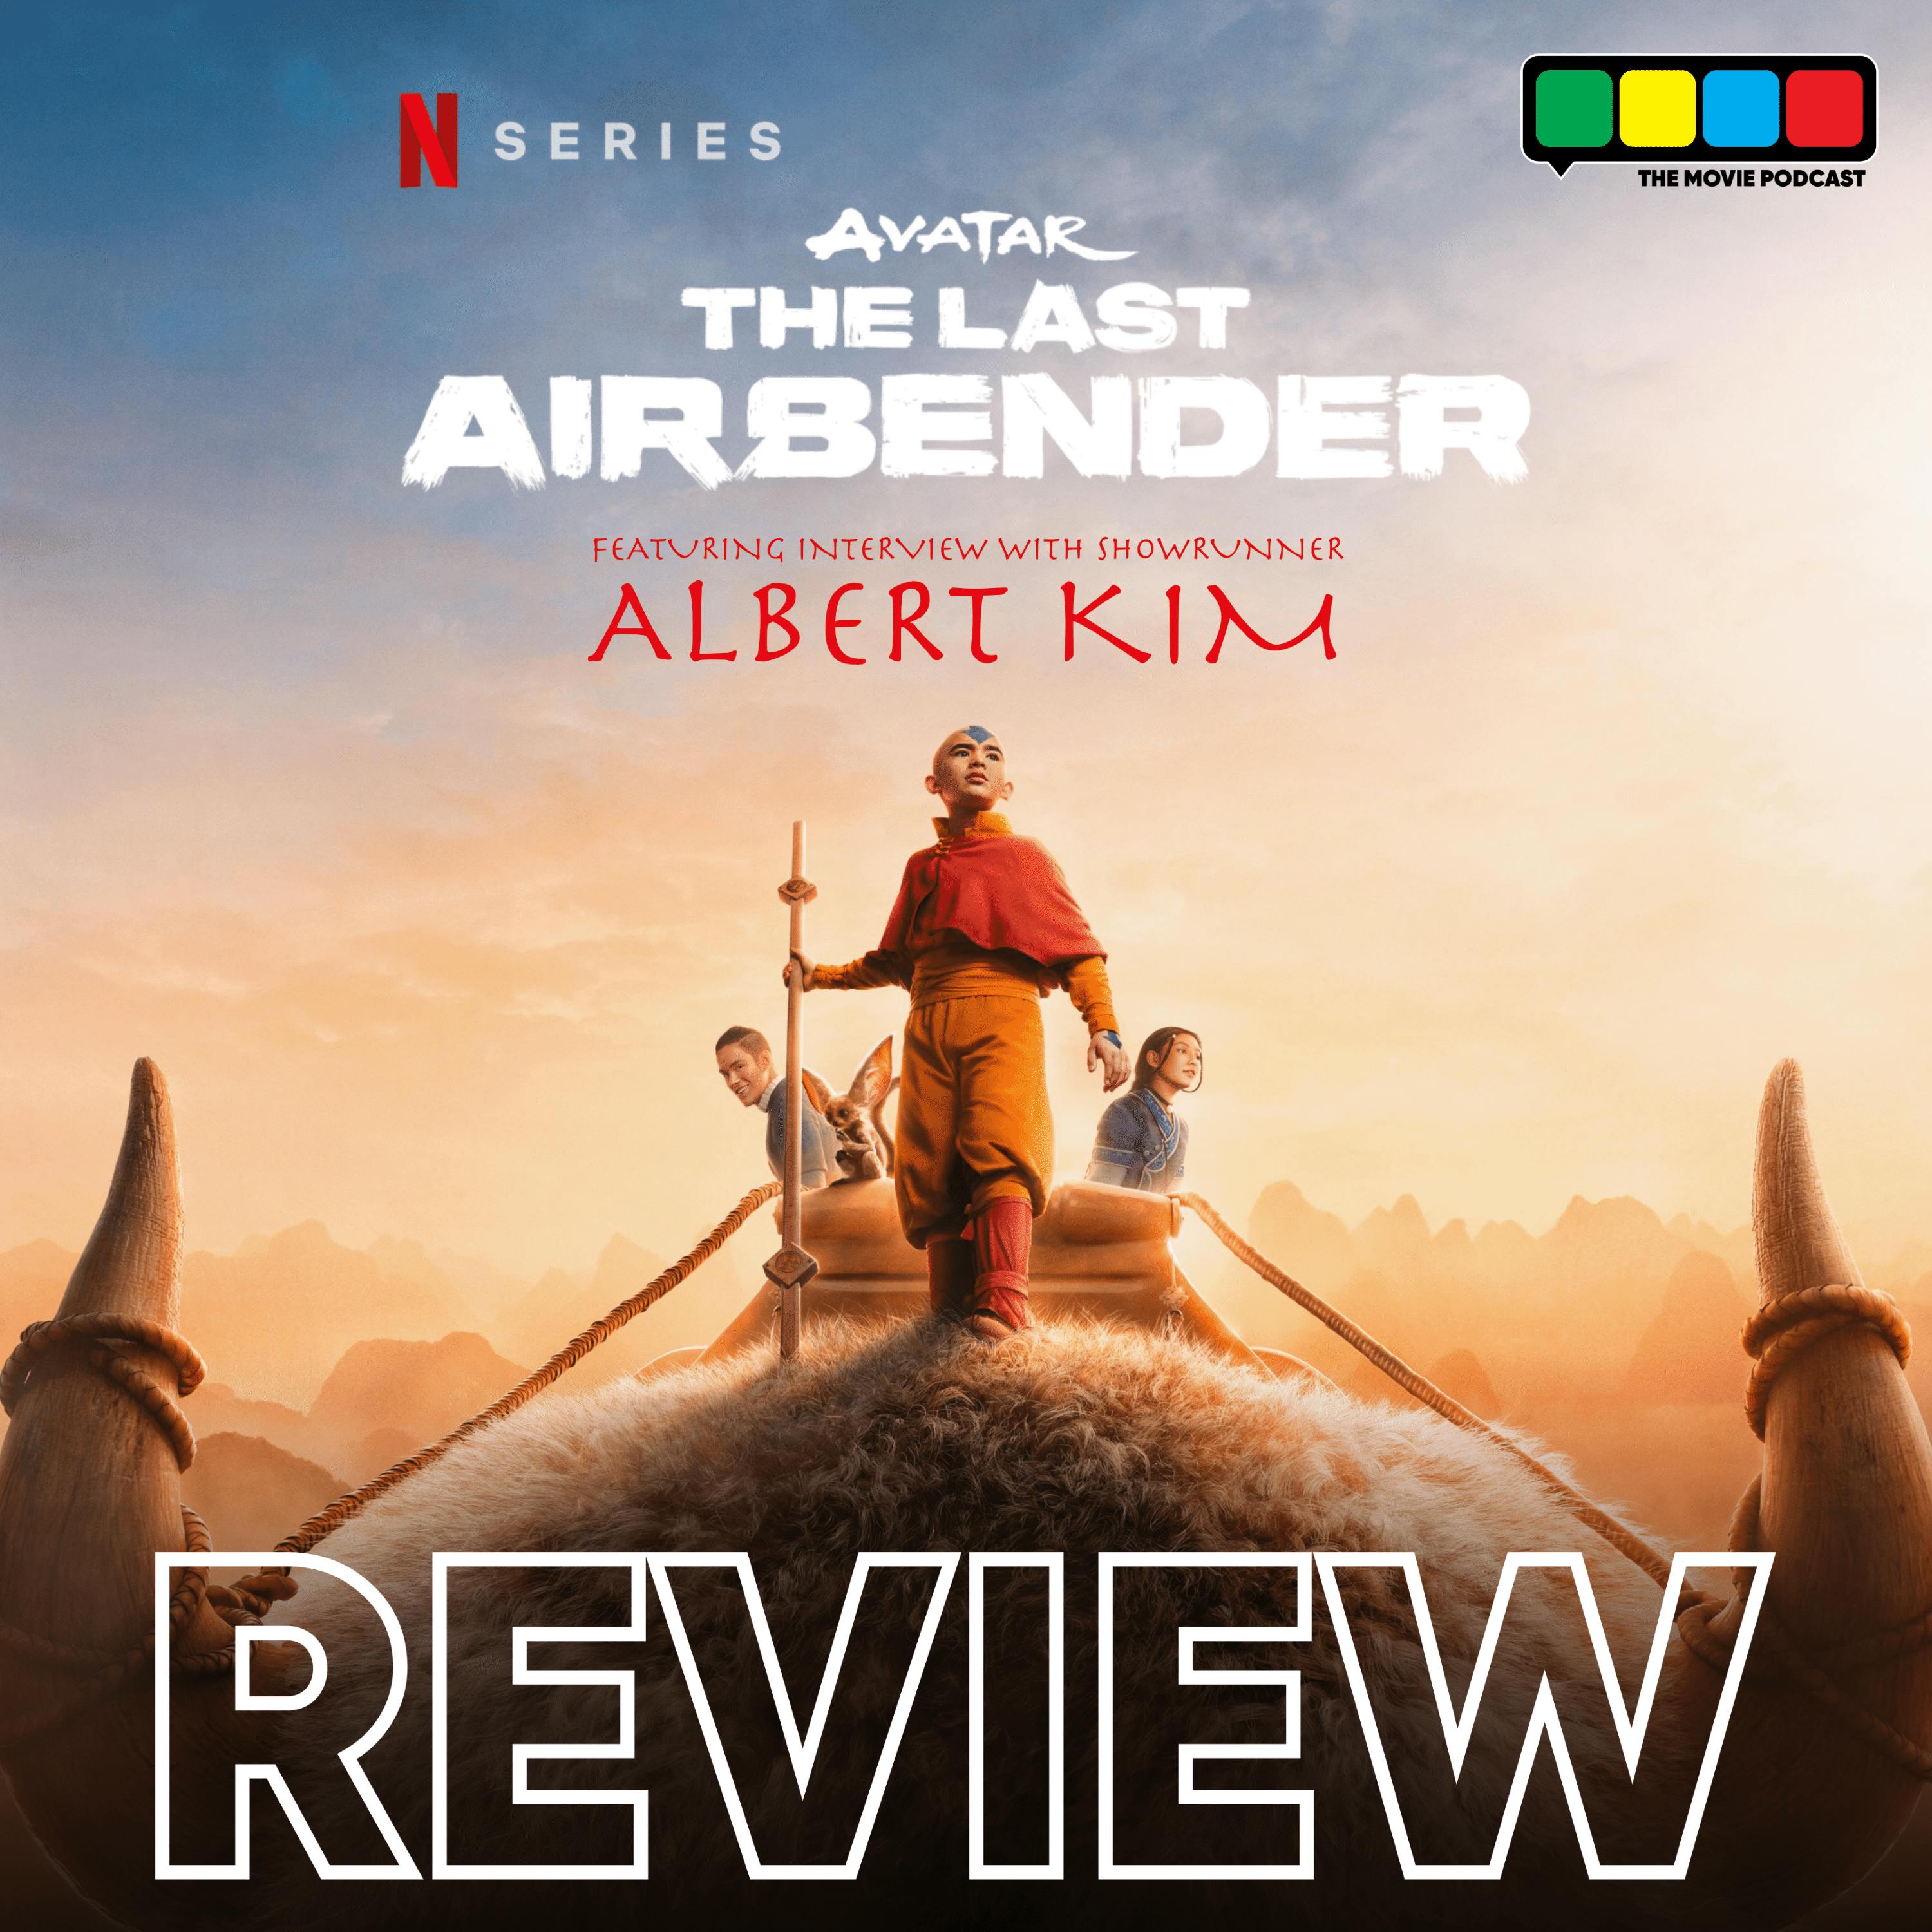 Avatar: The Last Airbender Netflix TV Series Review and Interview with Albert Kim (Showrunner, Writer, & Executive Producer)